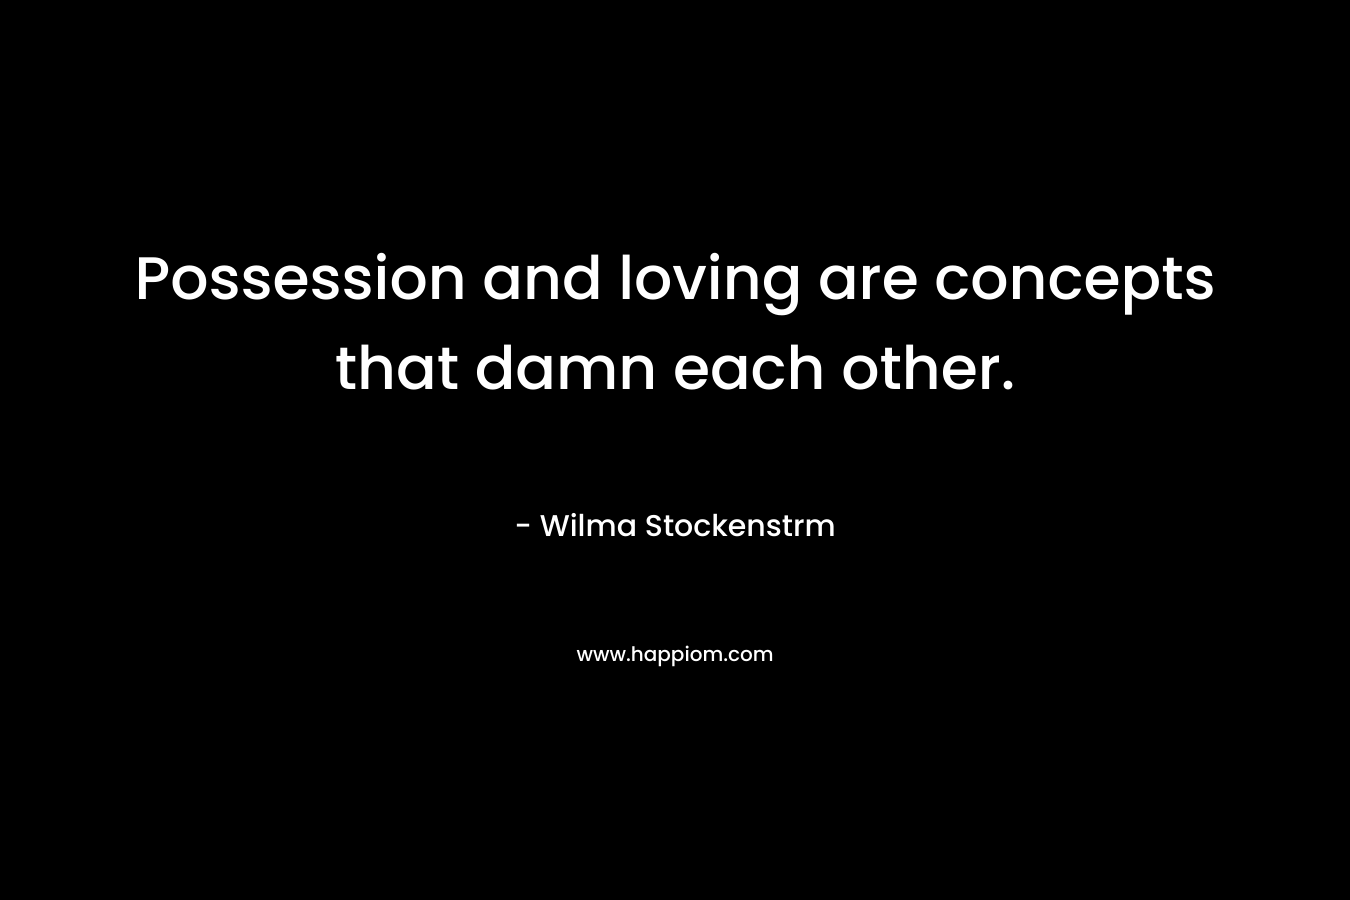 Possession and loving are concepts that damn each other.